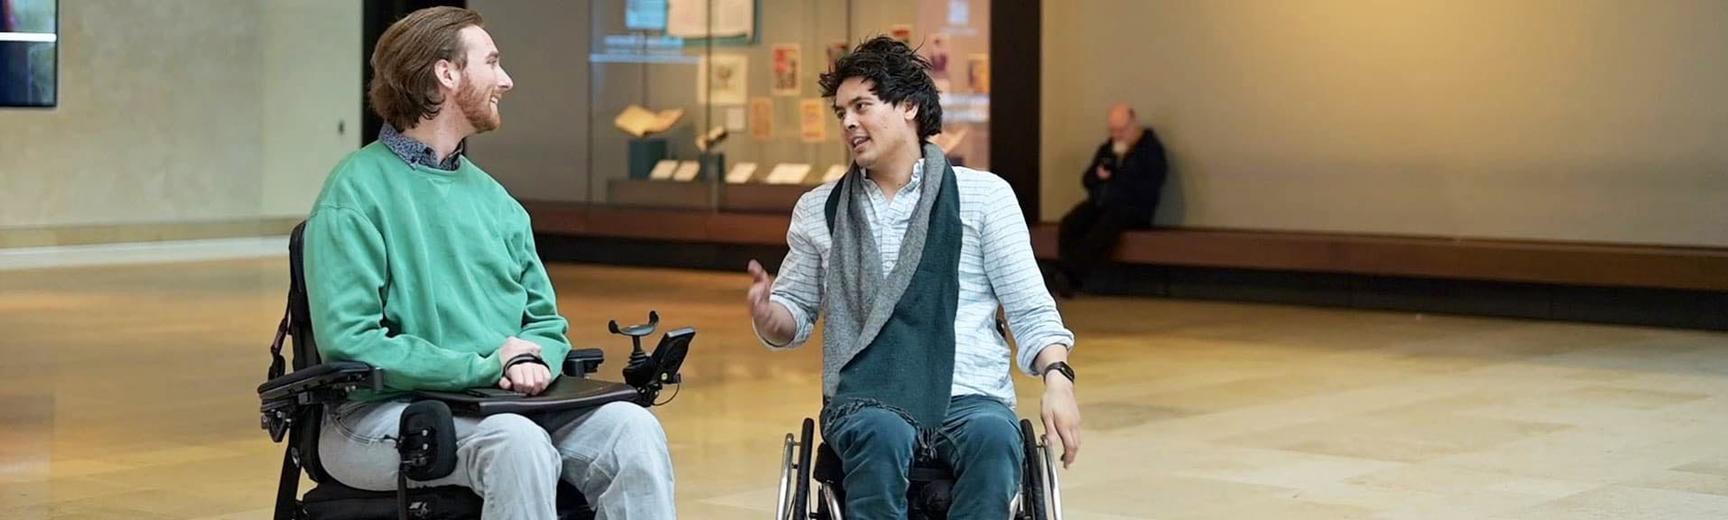 Two people in wheelchairs speak to each other in a large hall